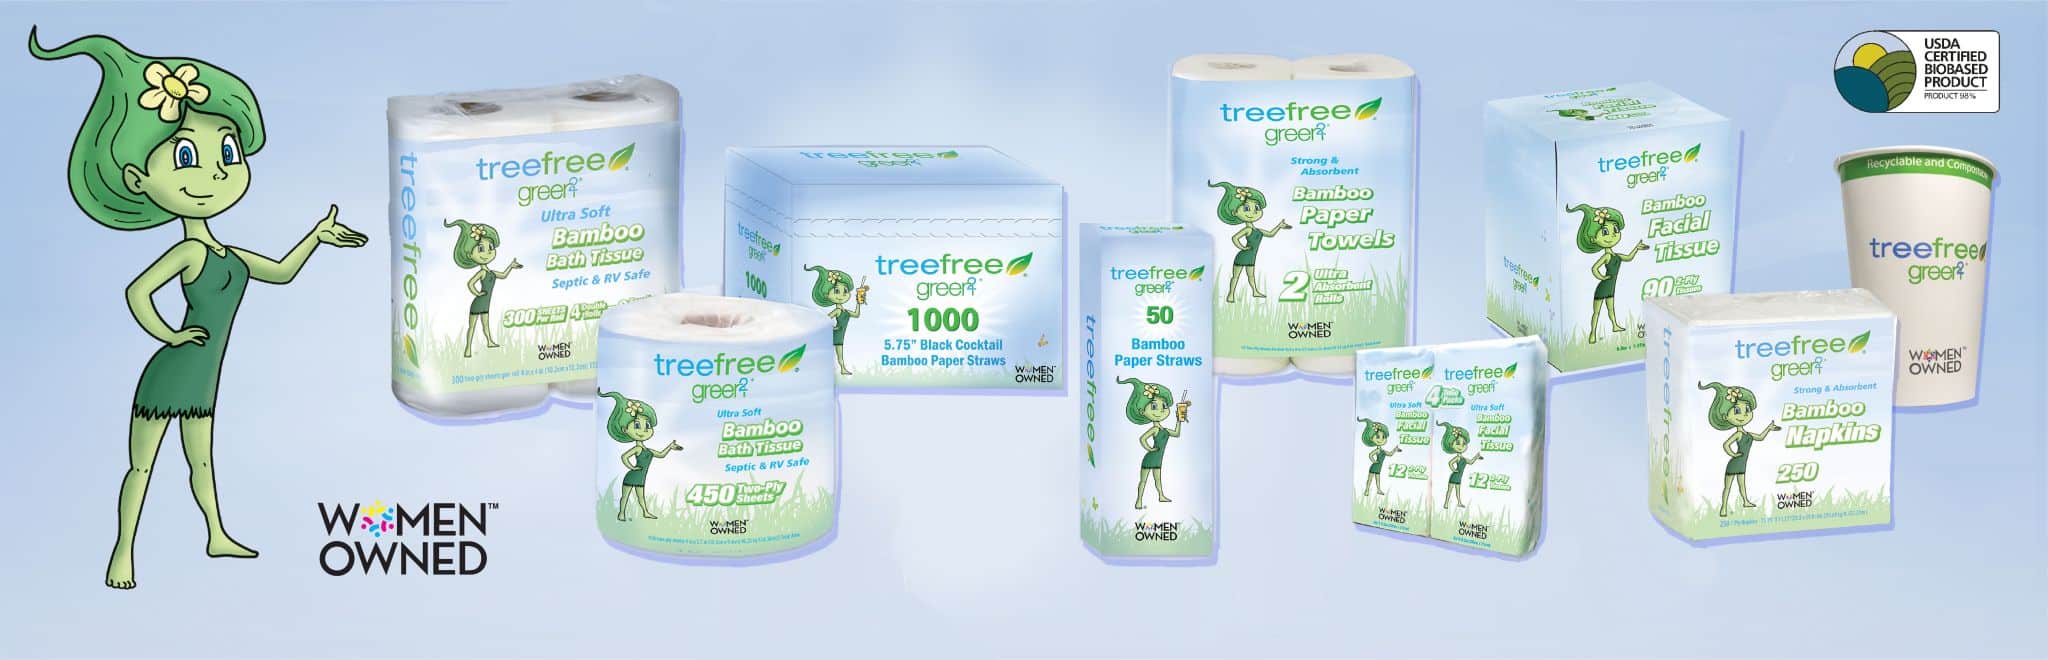 Green2 tree free paper products